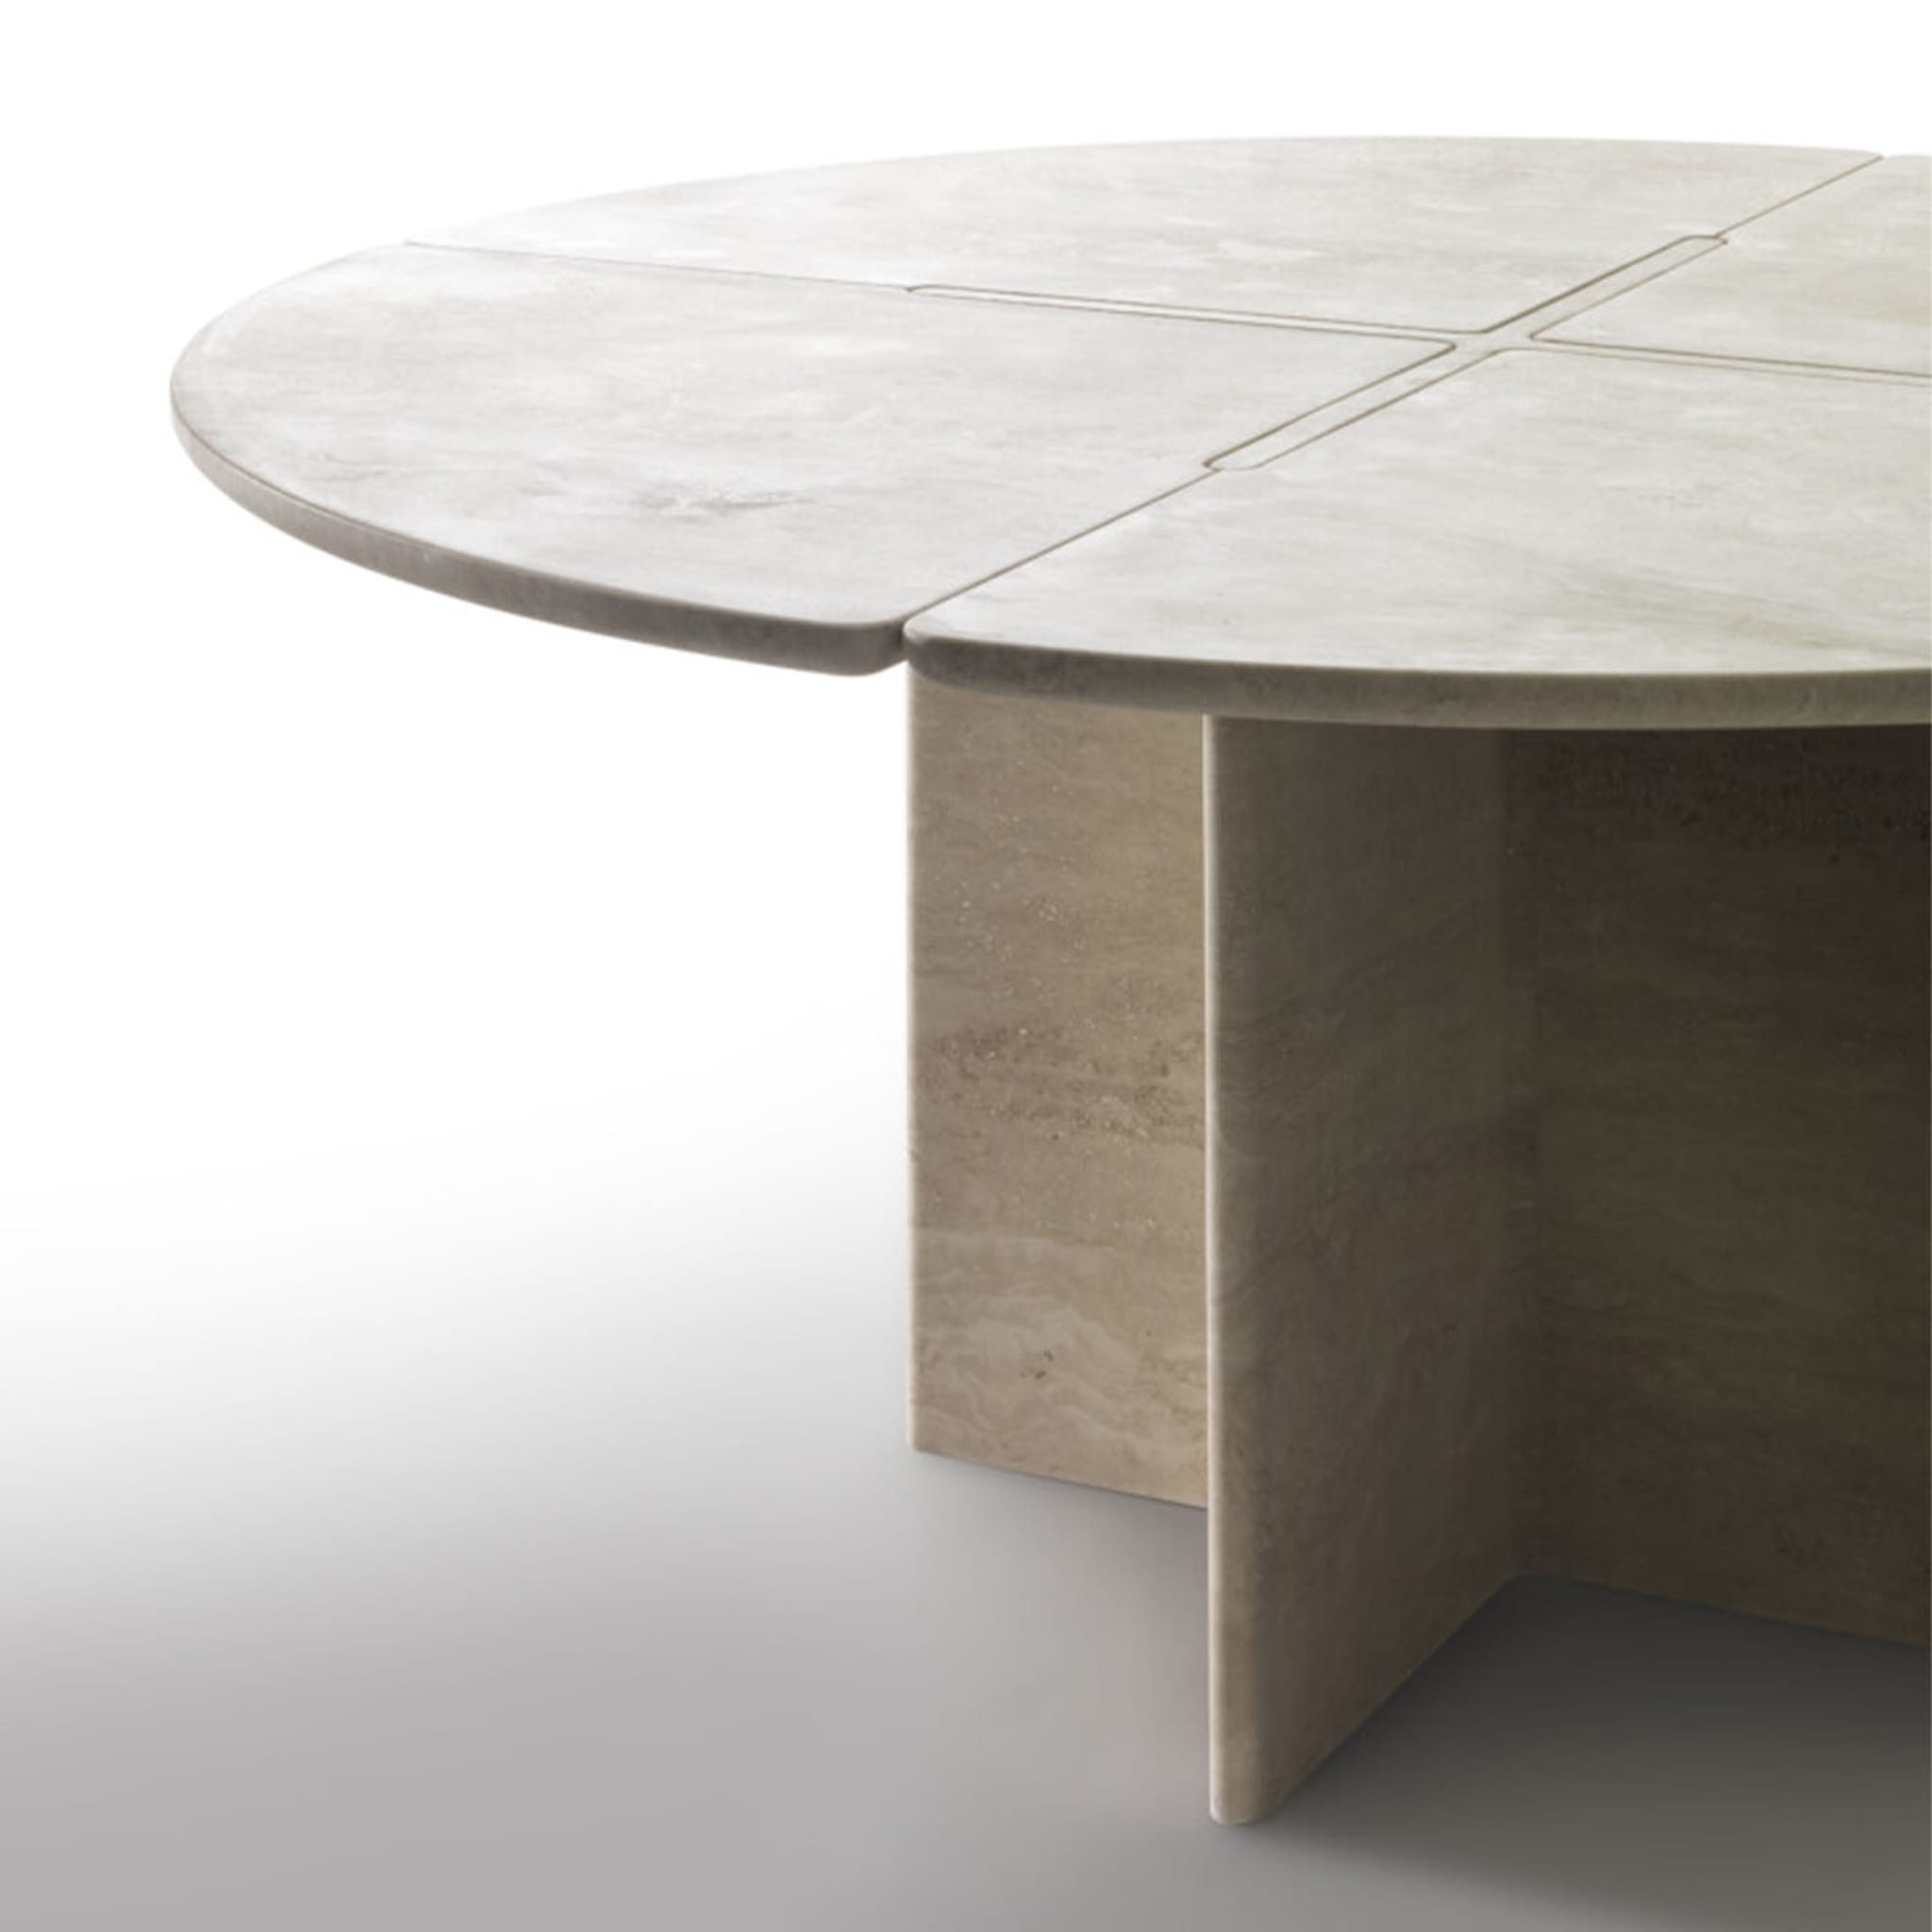 More Round Dining Table by Marco Spatti - Alternative view 1